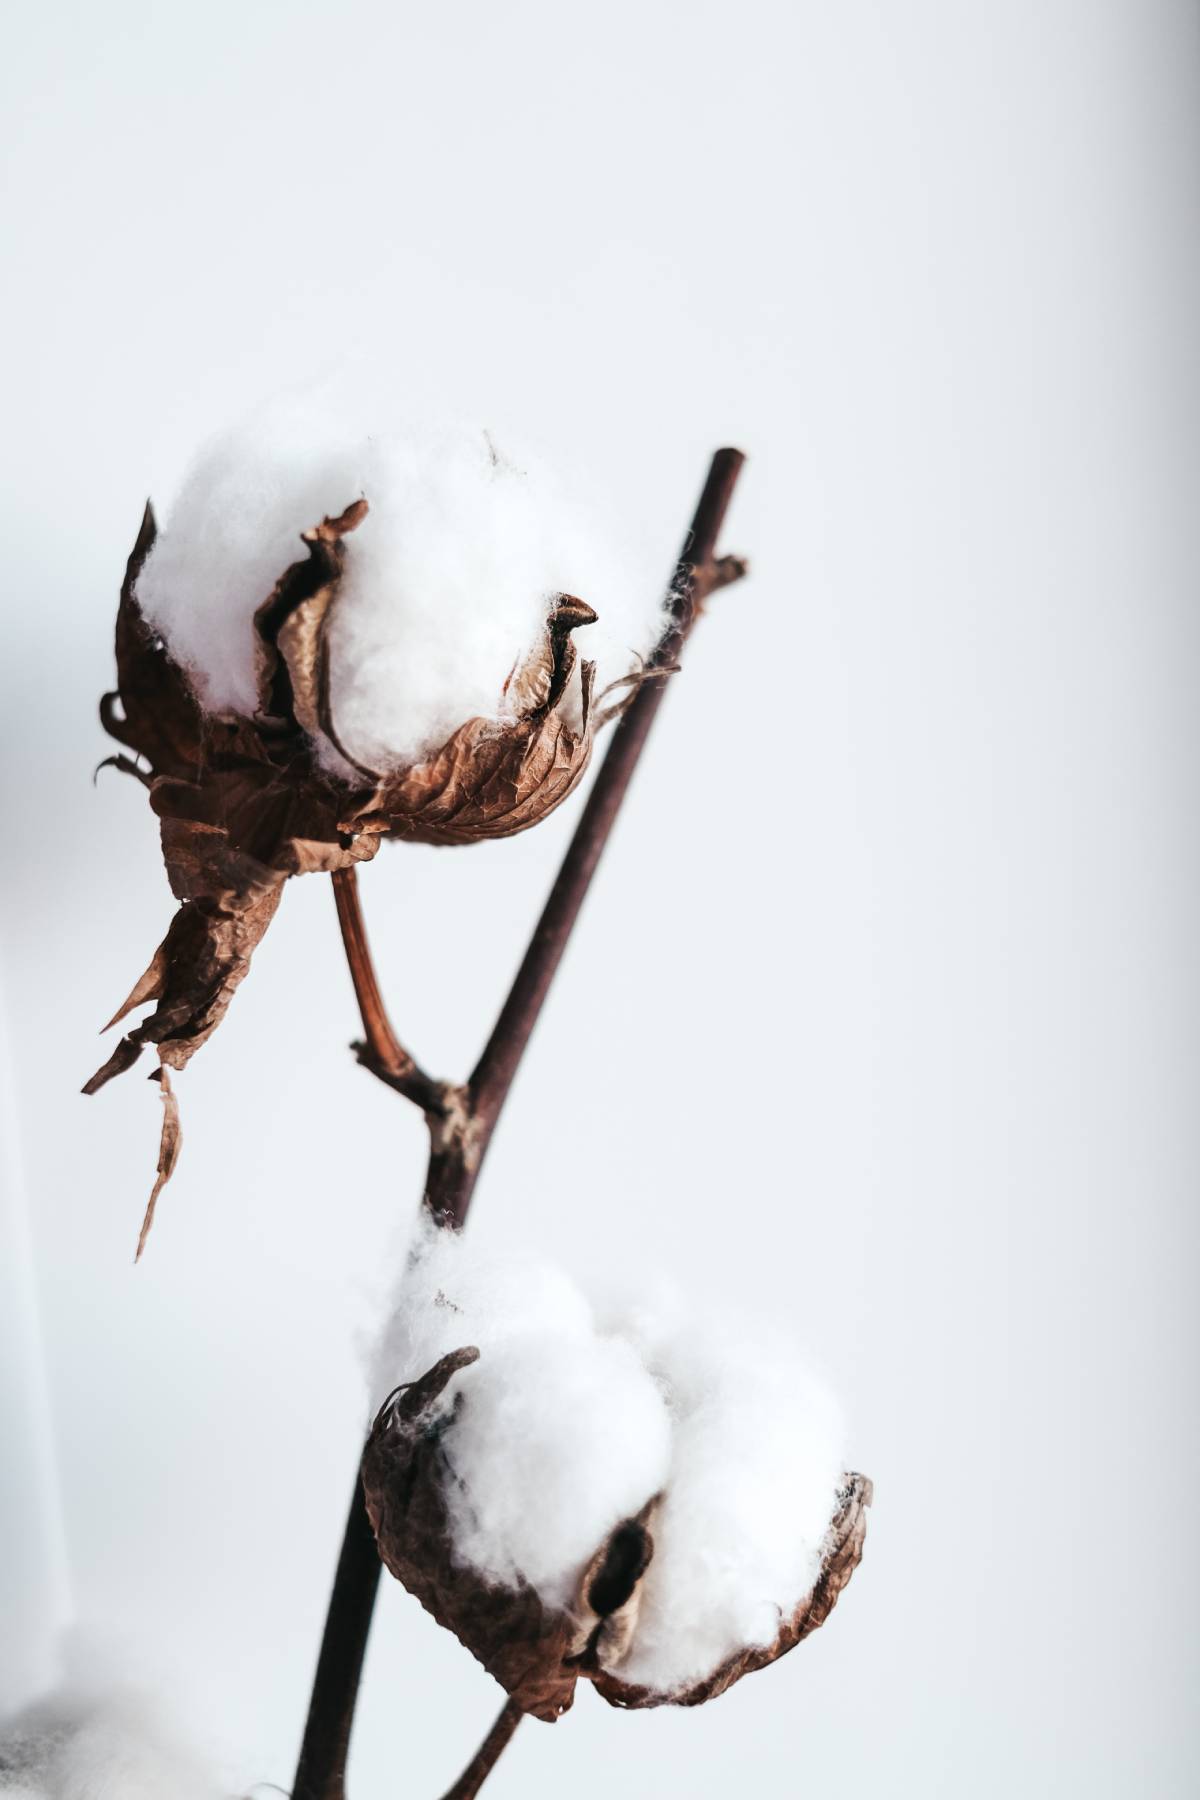 Cotton Fabrics is made from Natural cotton plant. Up-close photo of cotton plant.